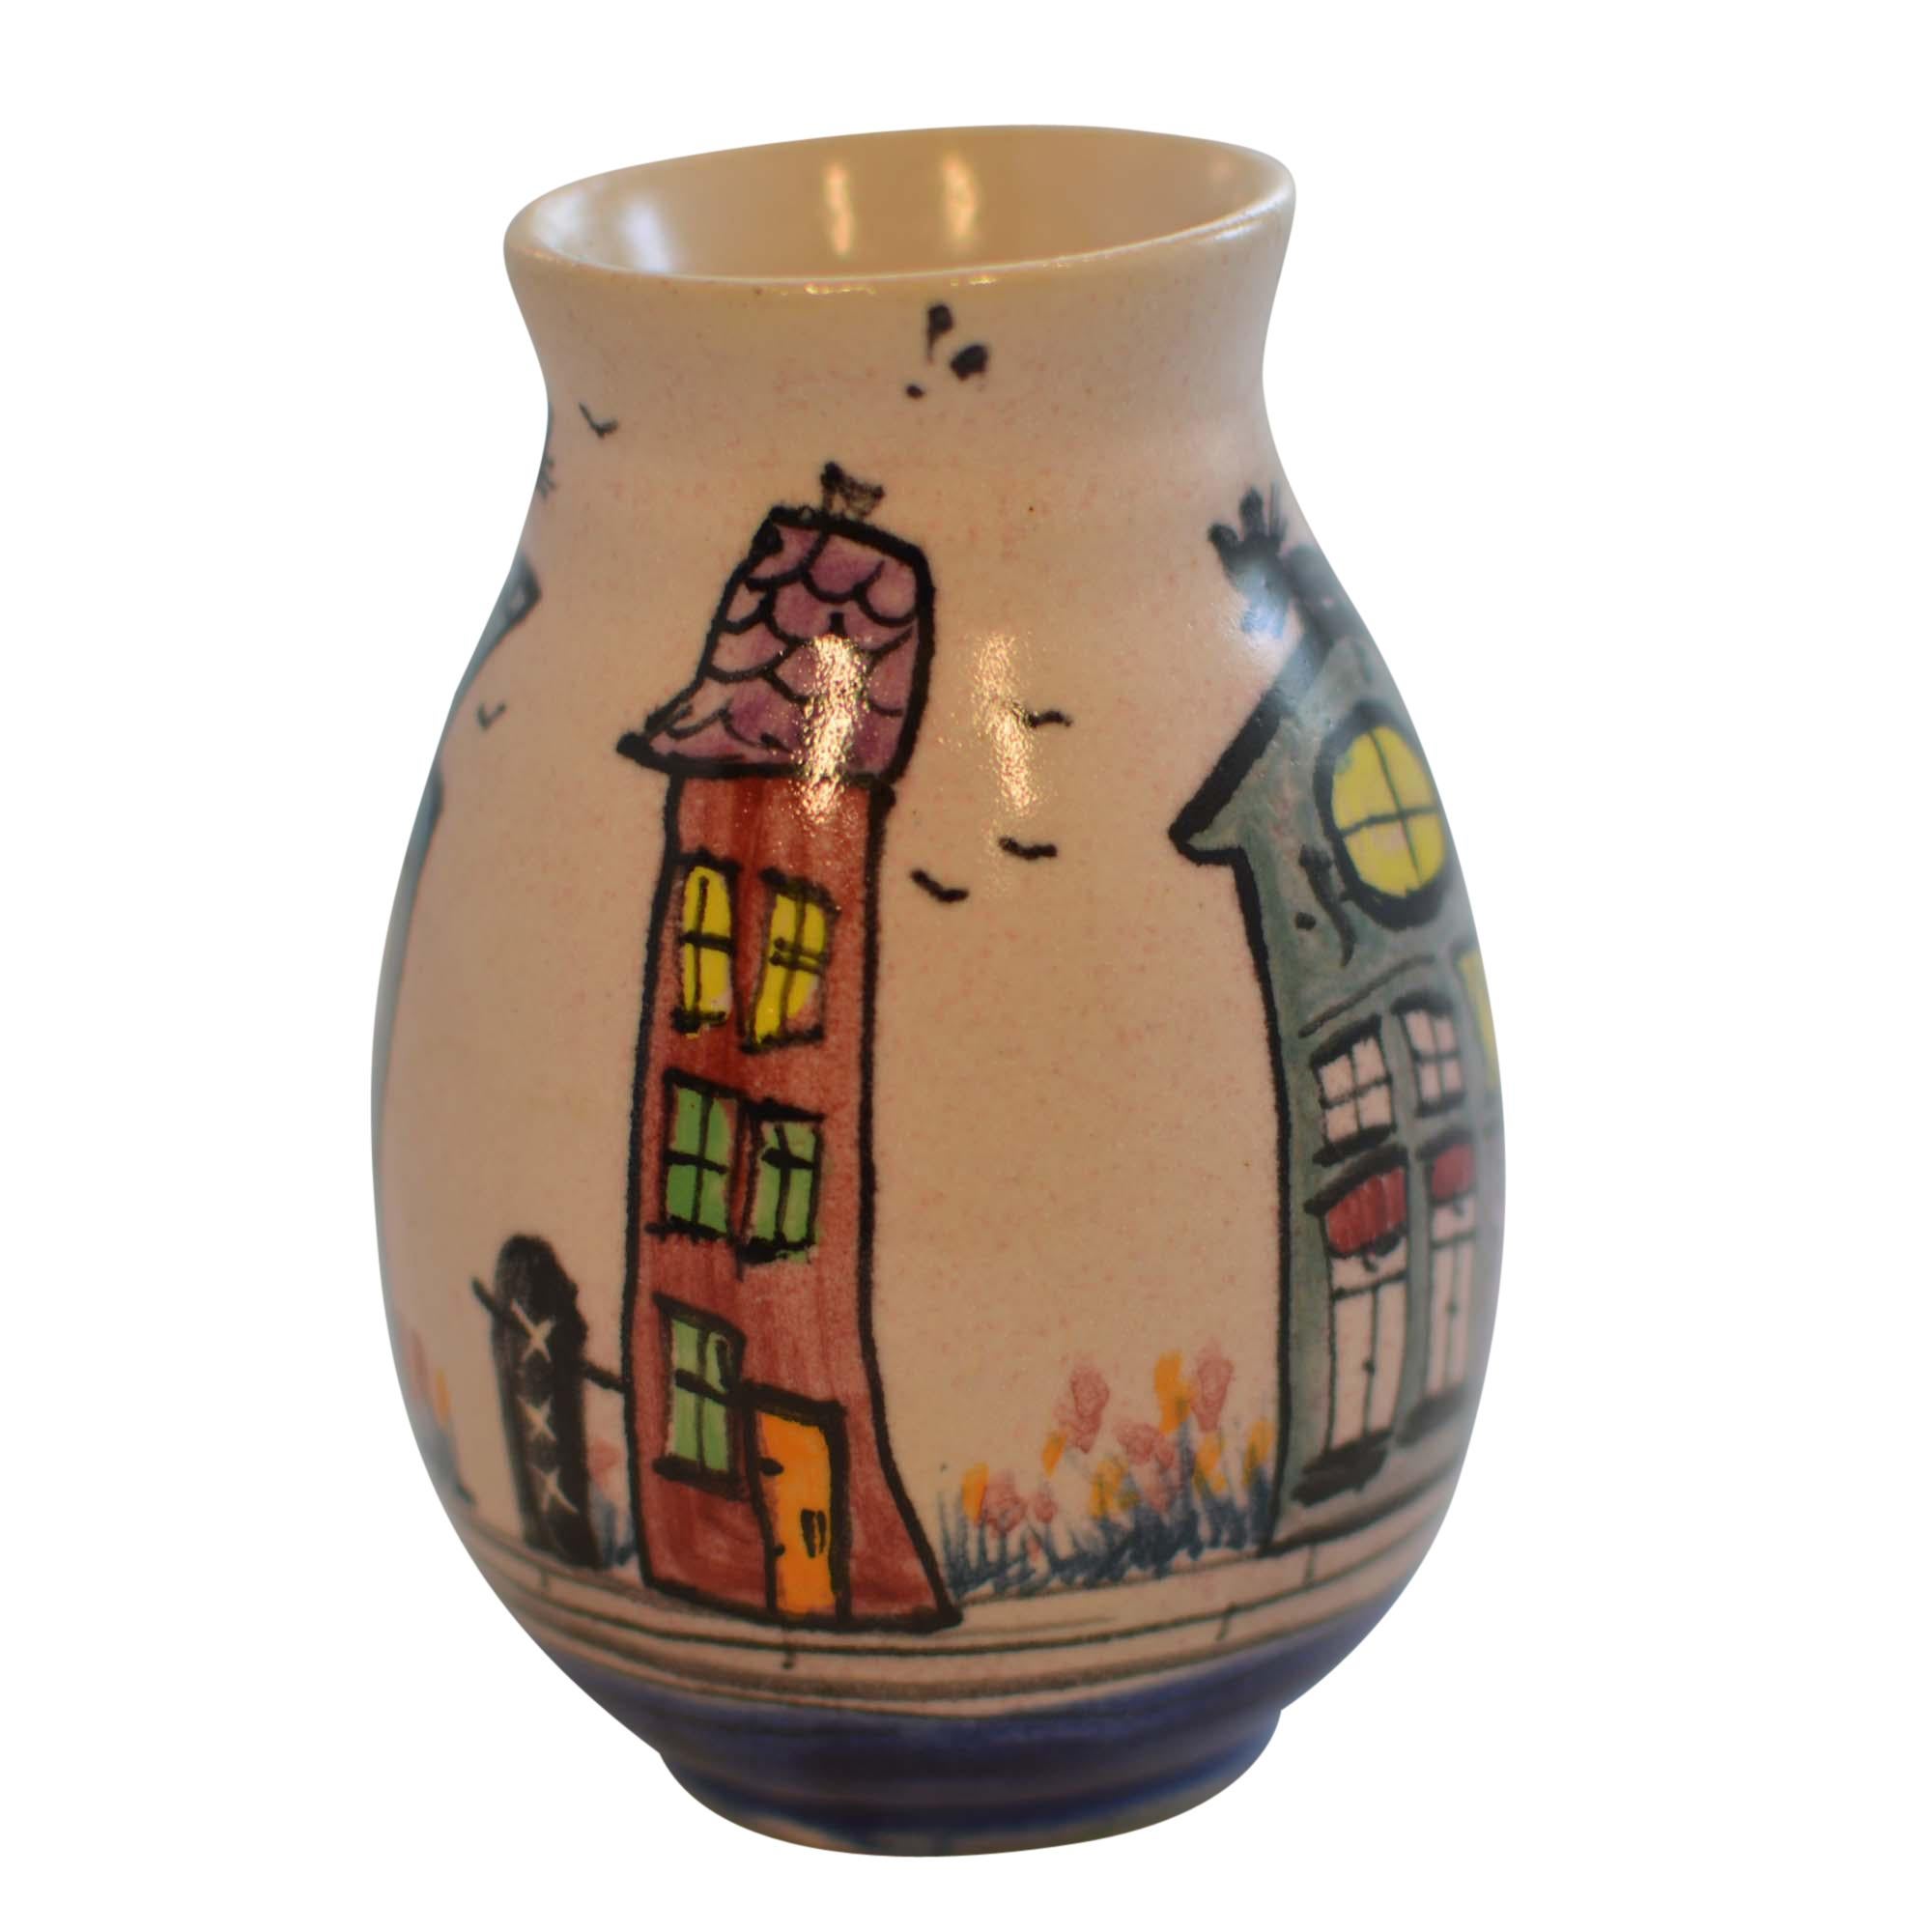 handcrafted bud vase is the work of Anna Maria Preuss. The vase features a scene of hand painted canal front homes with whimsical cats sitting atop homes, one sits on a green house while another is on the blue house. Anna's mark is on the bottom.